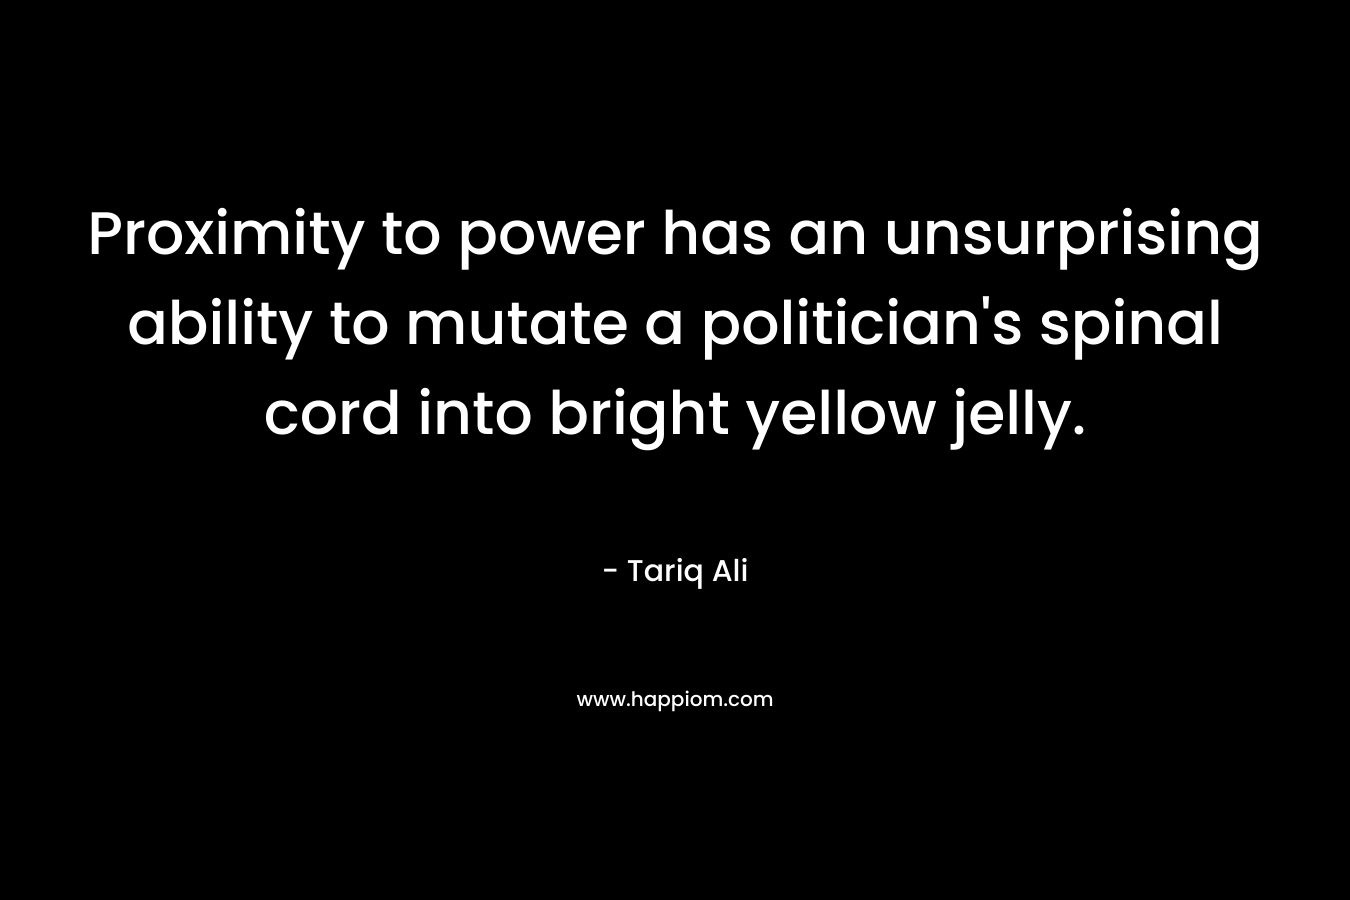 Proximity to power has an unsurprising ability to mutate a politician's spinal cord into bright yellow jelly.